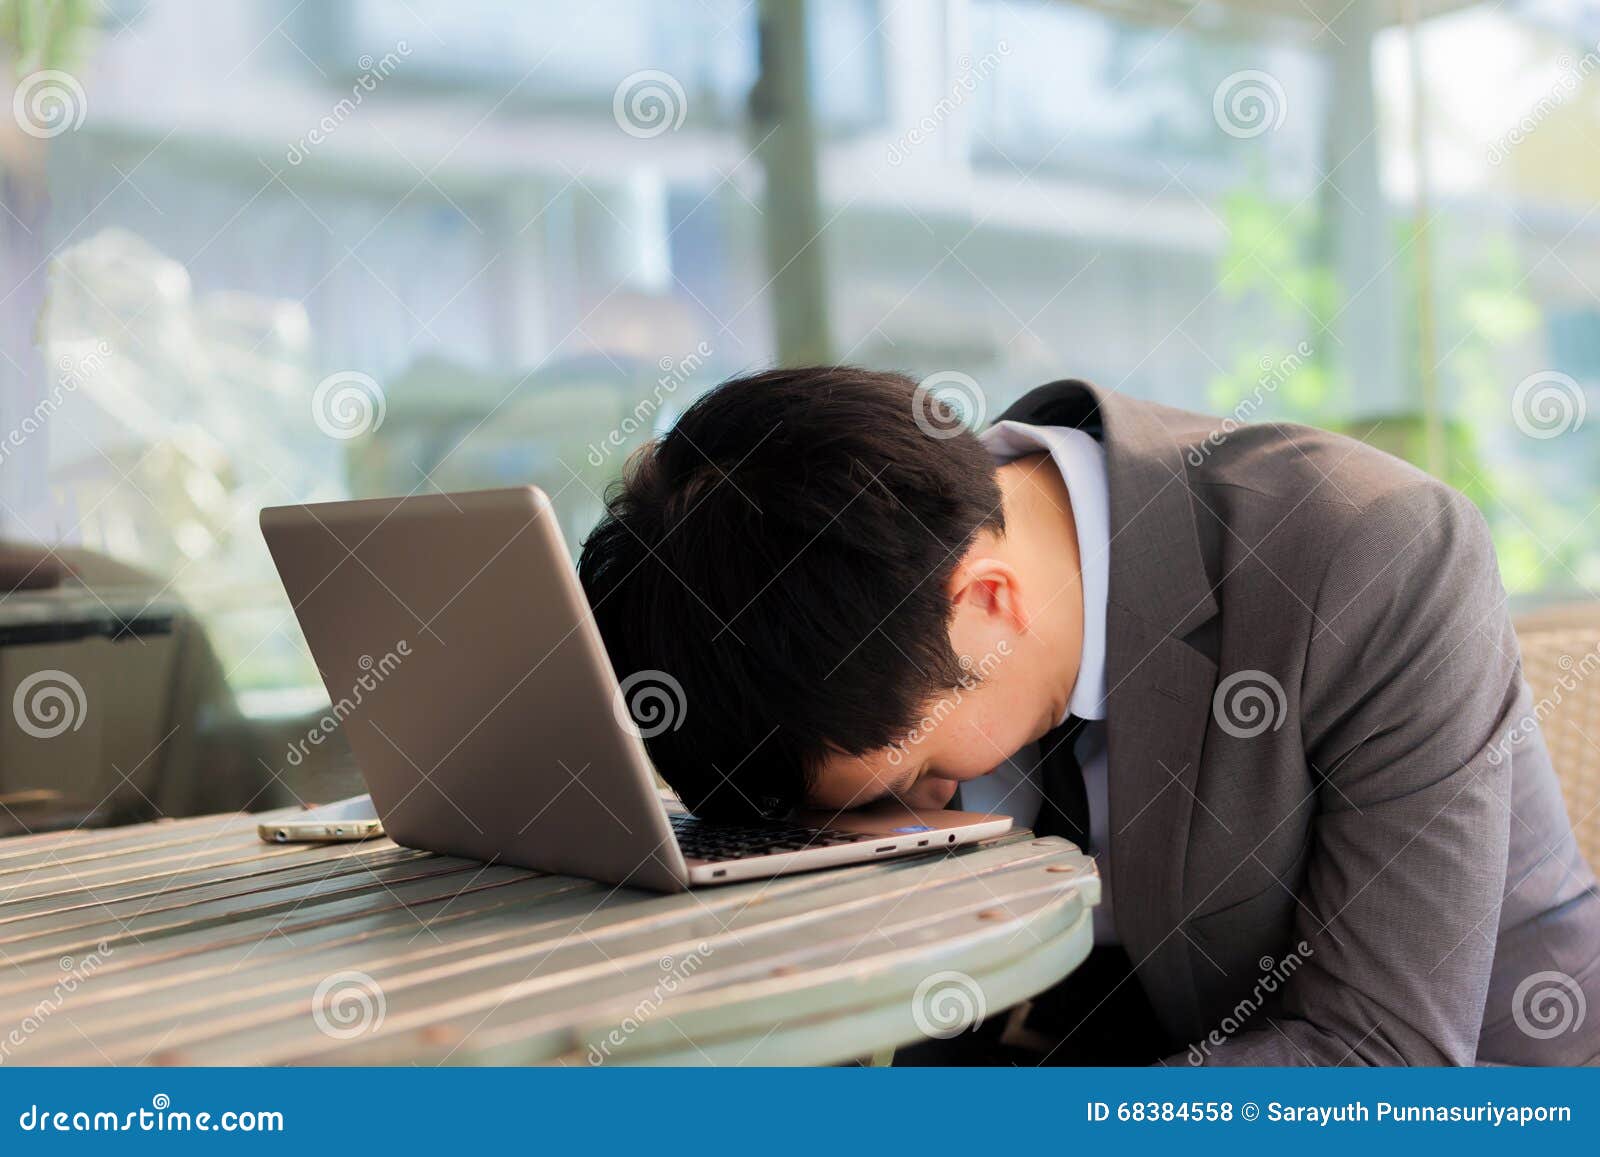 businessman tiring and sleeping on his laptop in outdoor scene